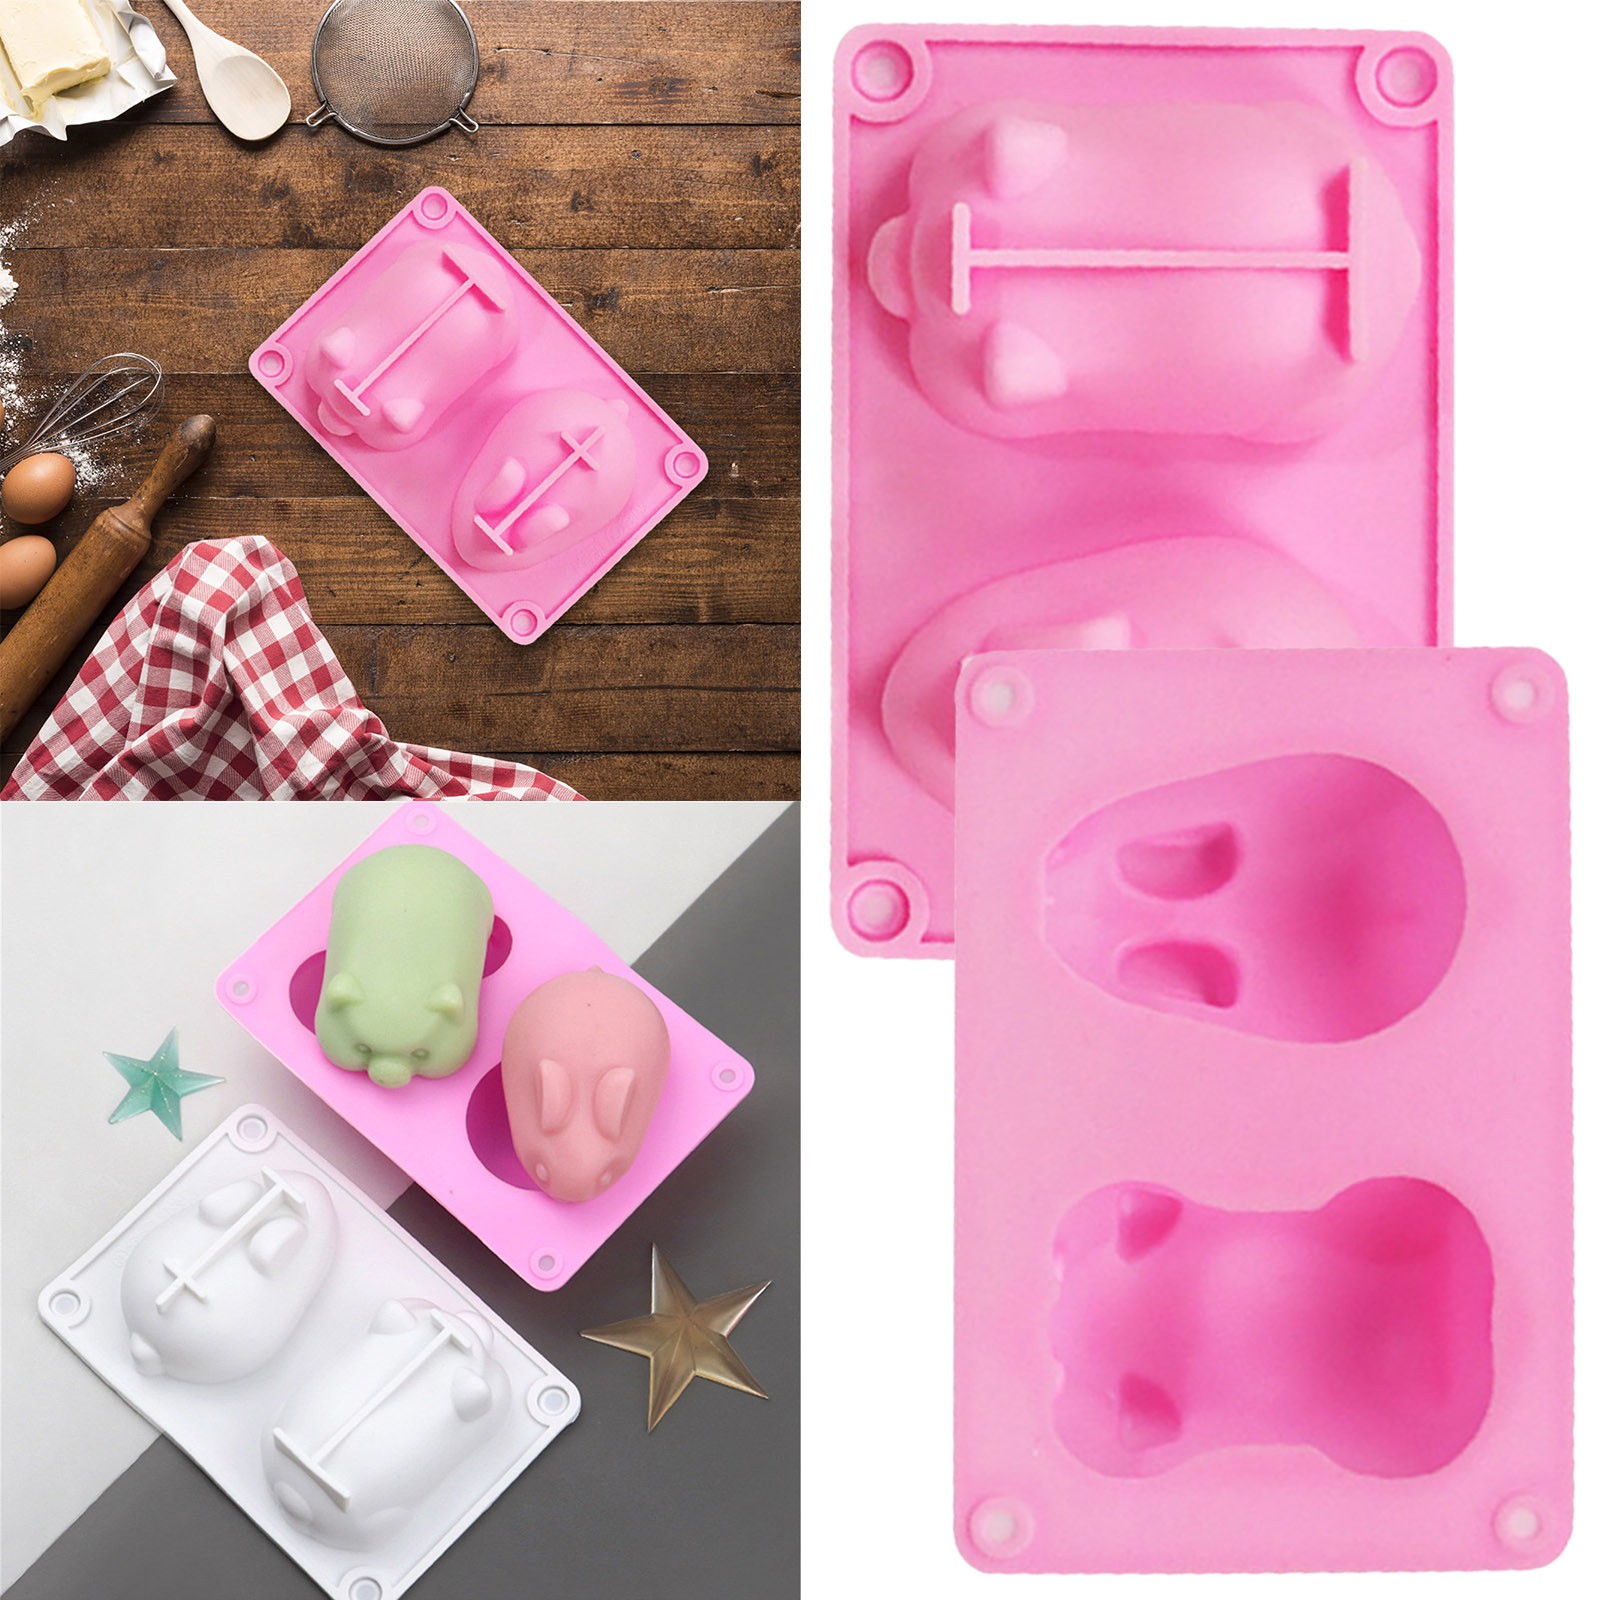 Star Molds for Chocolate Wax Melts Molds Silicone Washable Silicone Cake Cake Candy Chocolate Decorating Tray DIY Craft Project Circle Molds for